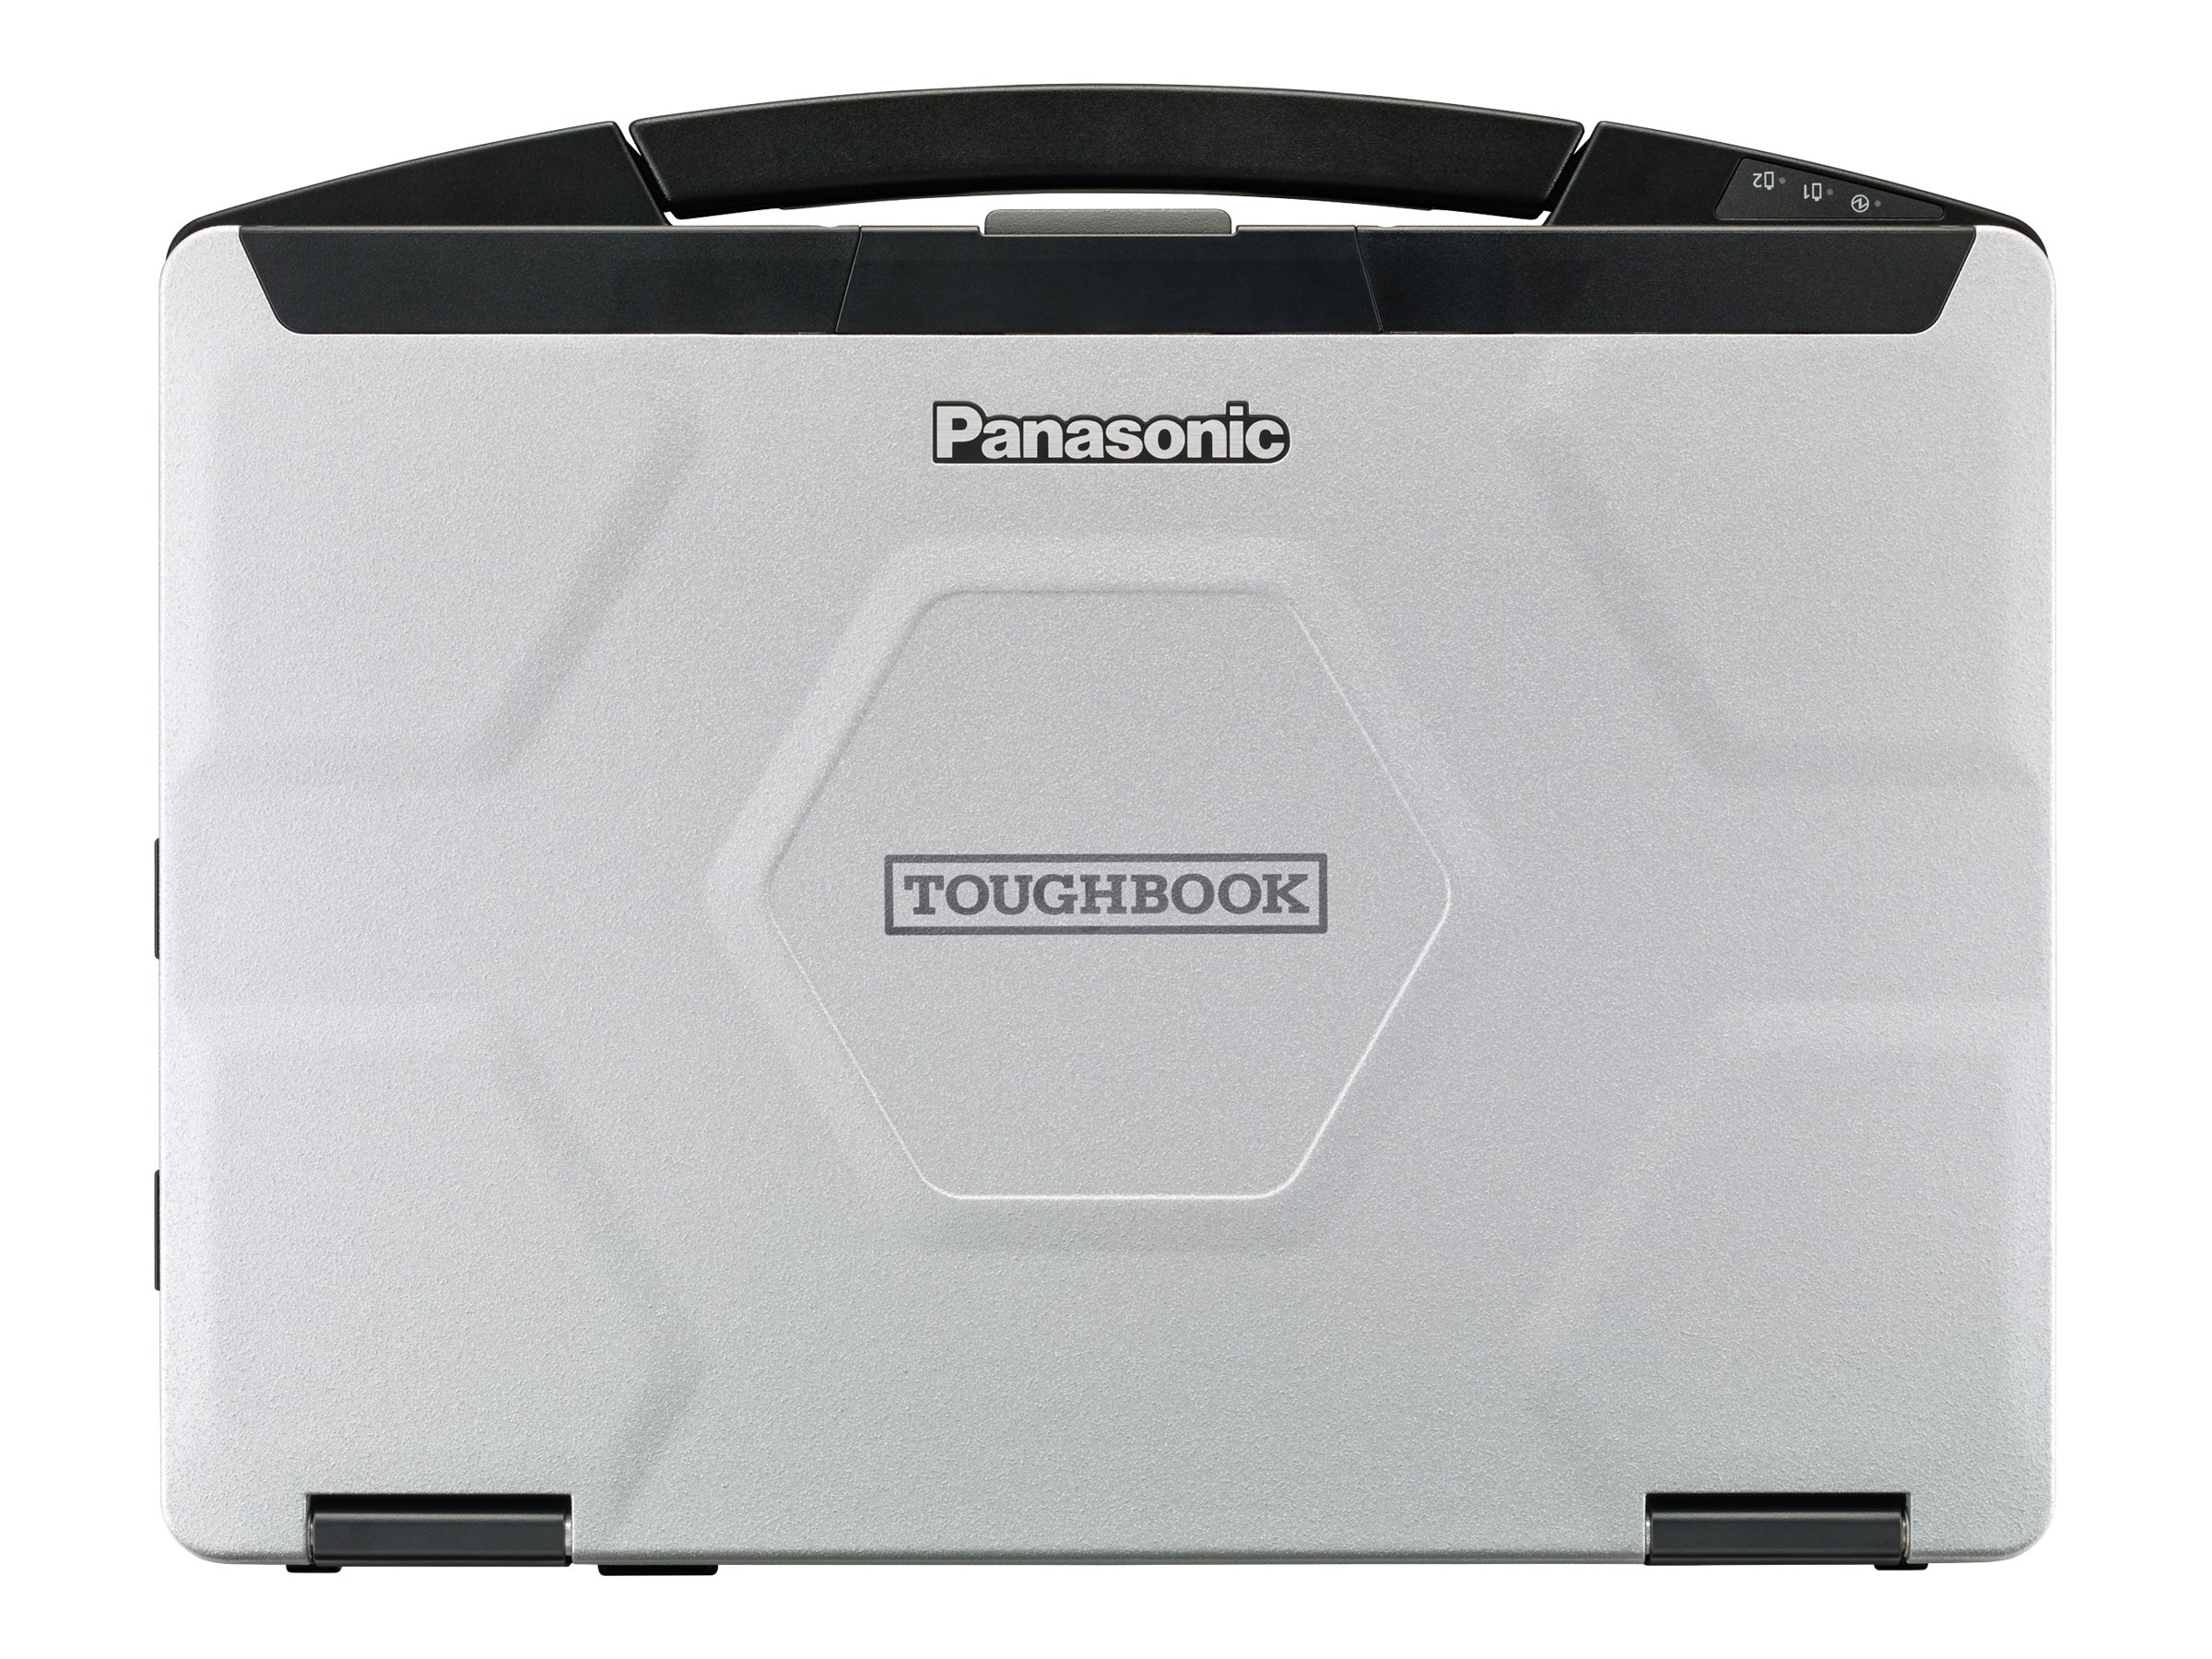 Panasonic Toughbook 54 Prime - Rugged - Intel Core i7 - 6600U / up to 3.4 GHz - vPro - Win 10 Pro 64-bit - HD Graphics 520 - 8 GB RAM - 256 GB SSD - DVD SuperMulti - 14" 1366 x 768 (HD) - Wi-Fi 5 - with Toughbook Preferred - image 5 of 16